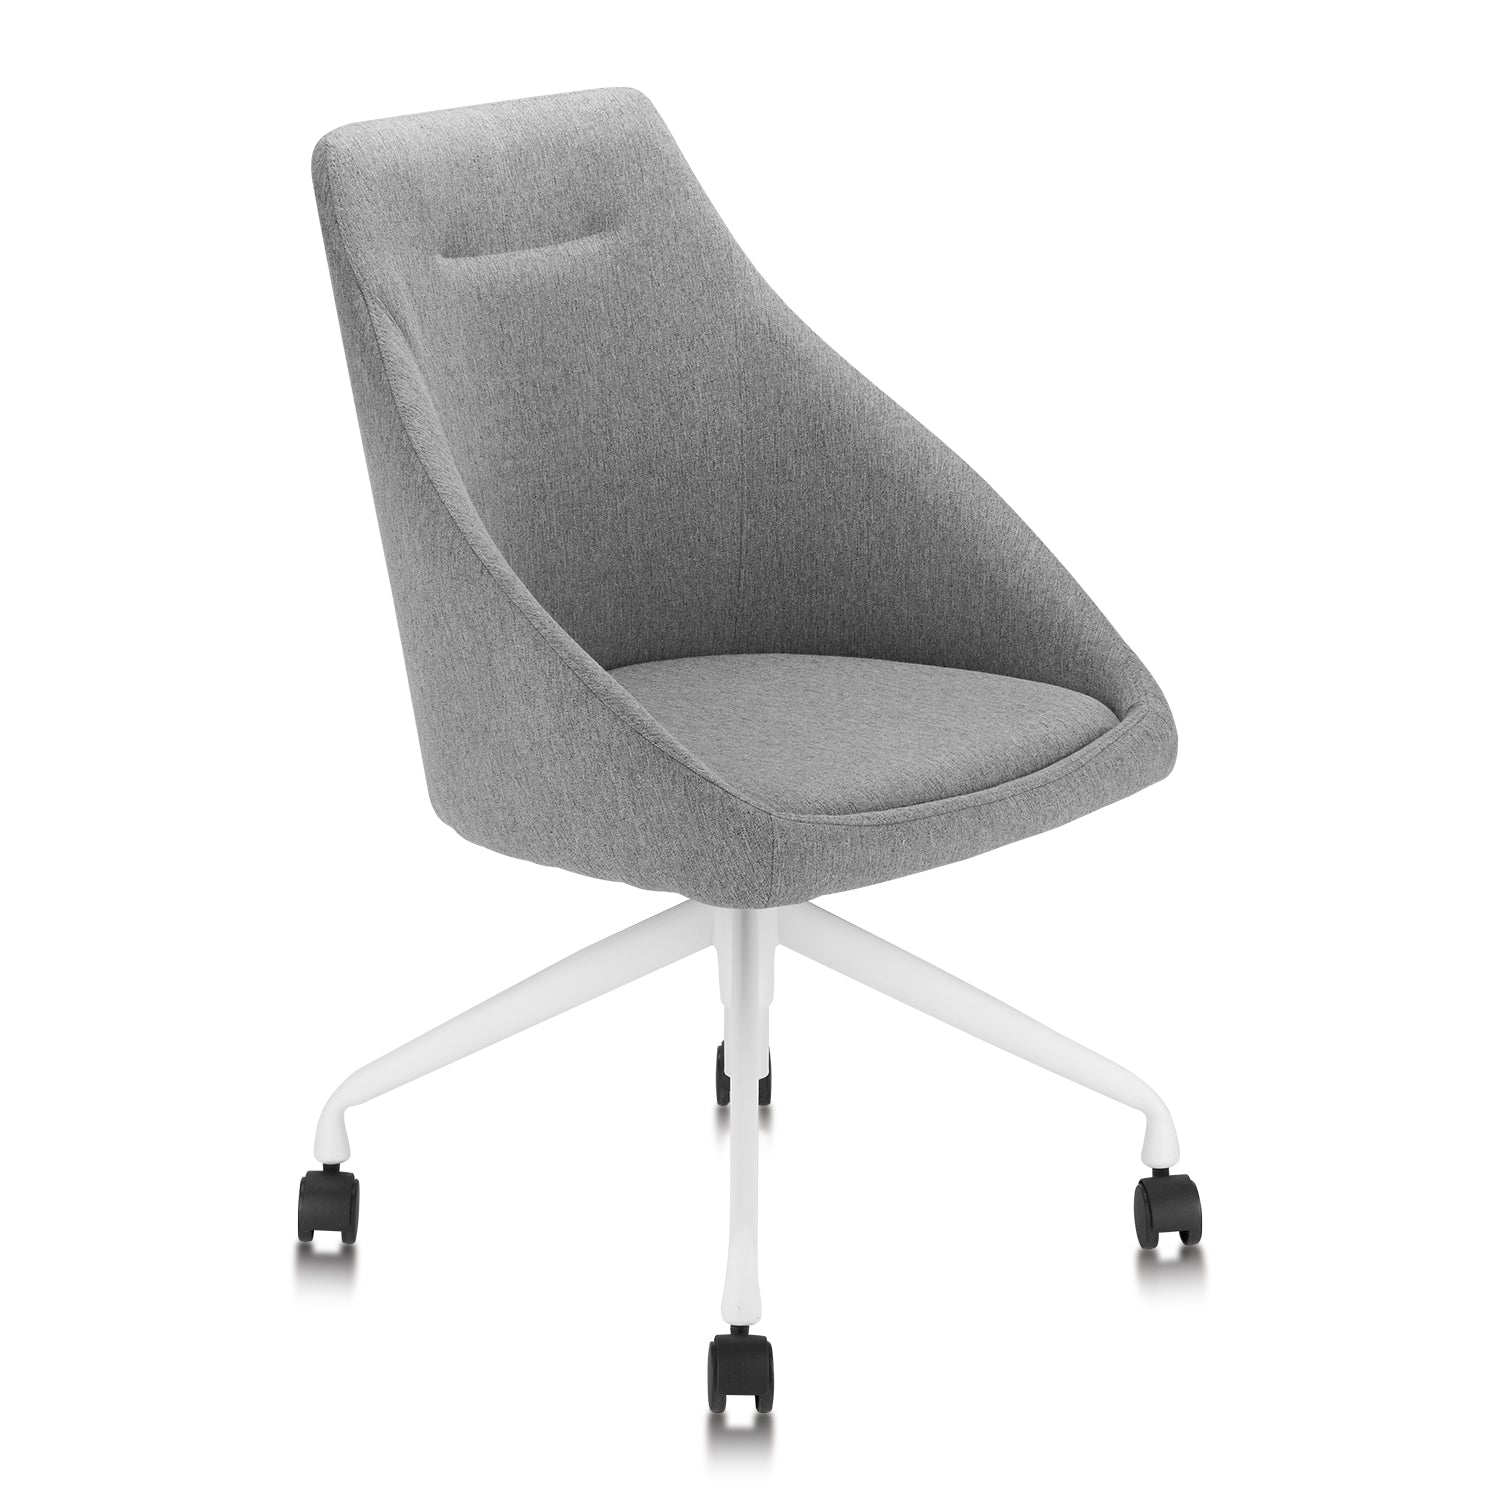 NOVIGO Grey Fabric Desk Chair Swivel Armless with Mid Back and Modern Style for Office Computer Home Living Room Dining Room Hallway Bedroom Comfortable Less Noise Easy Assemble